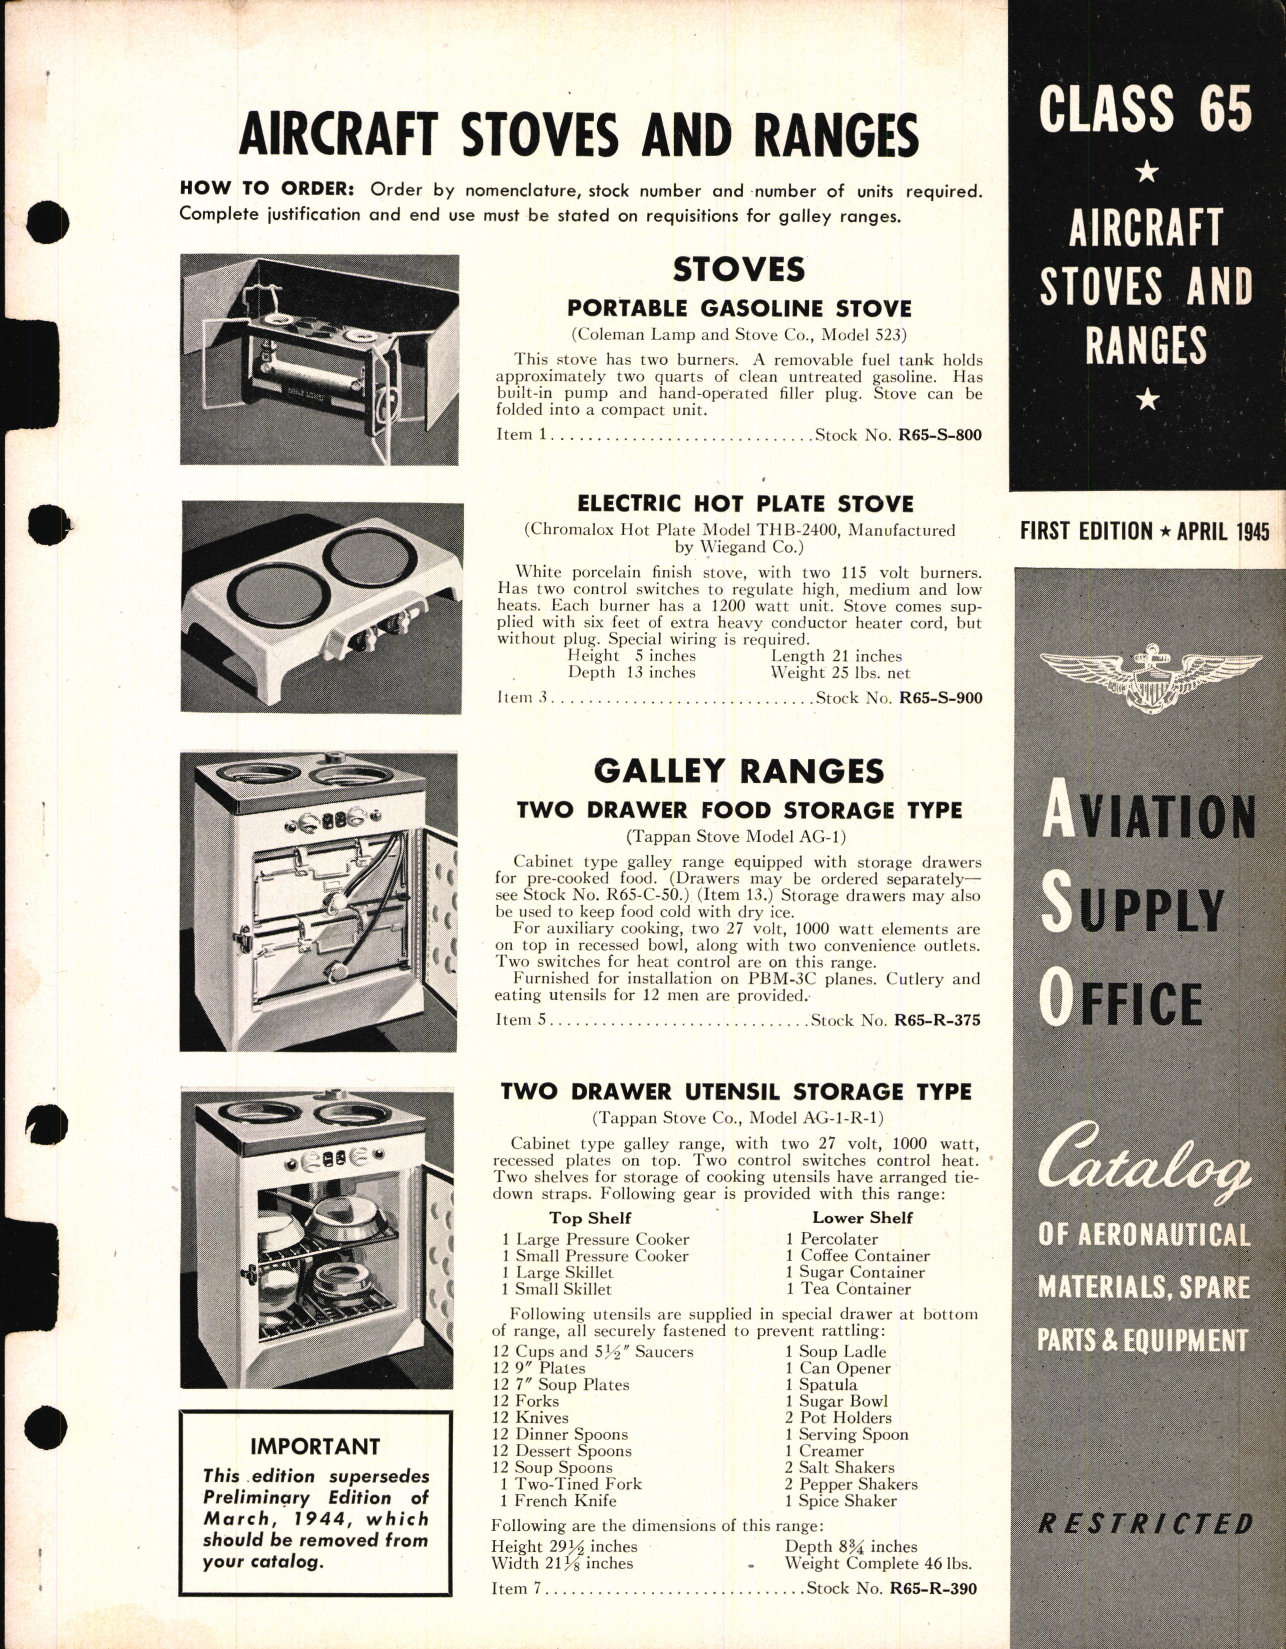 Sample page 1 from AirCorps Library document: Aircraft Stoves and Ranges